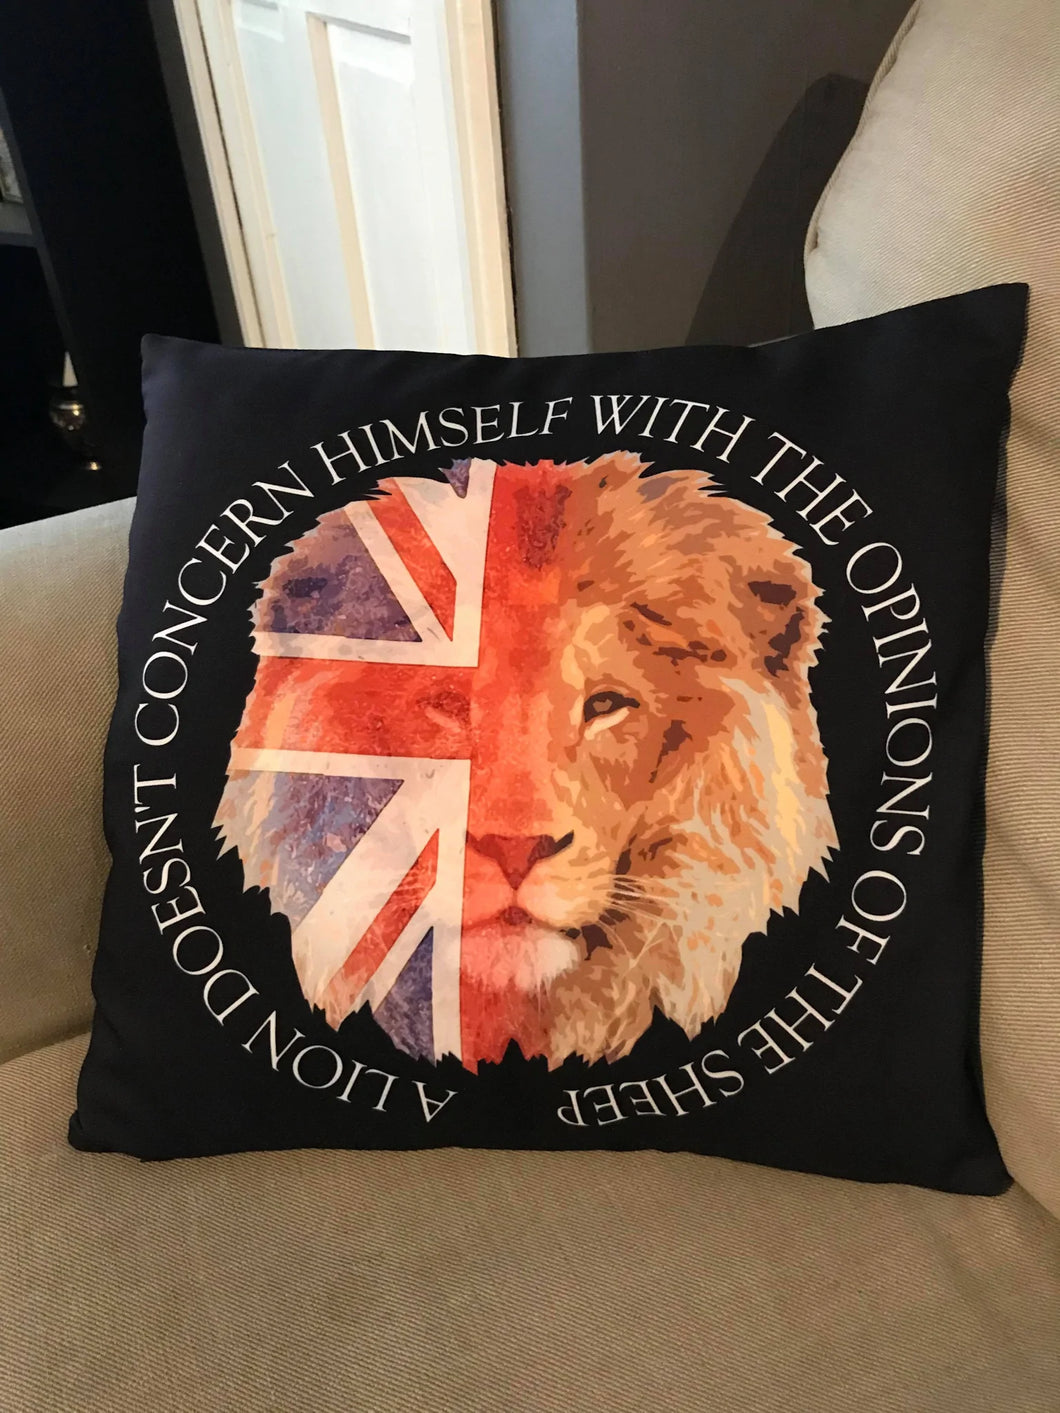 British Gifts - Veteran Gifts - Lions Roar - Gifts For Her - Gifts For Him - Cushion Cover